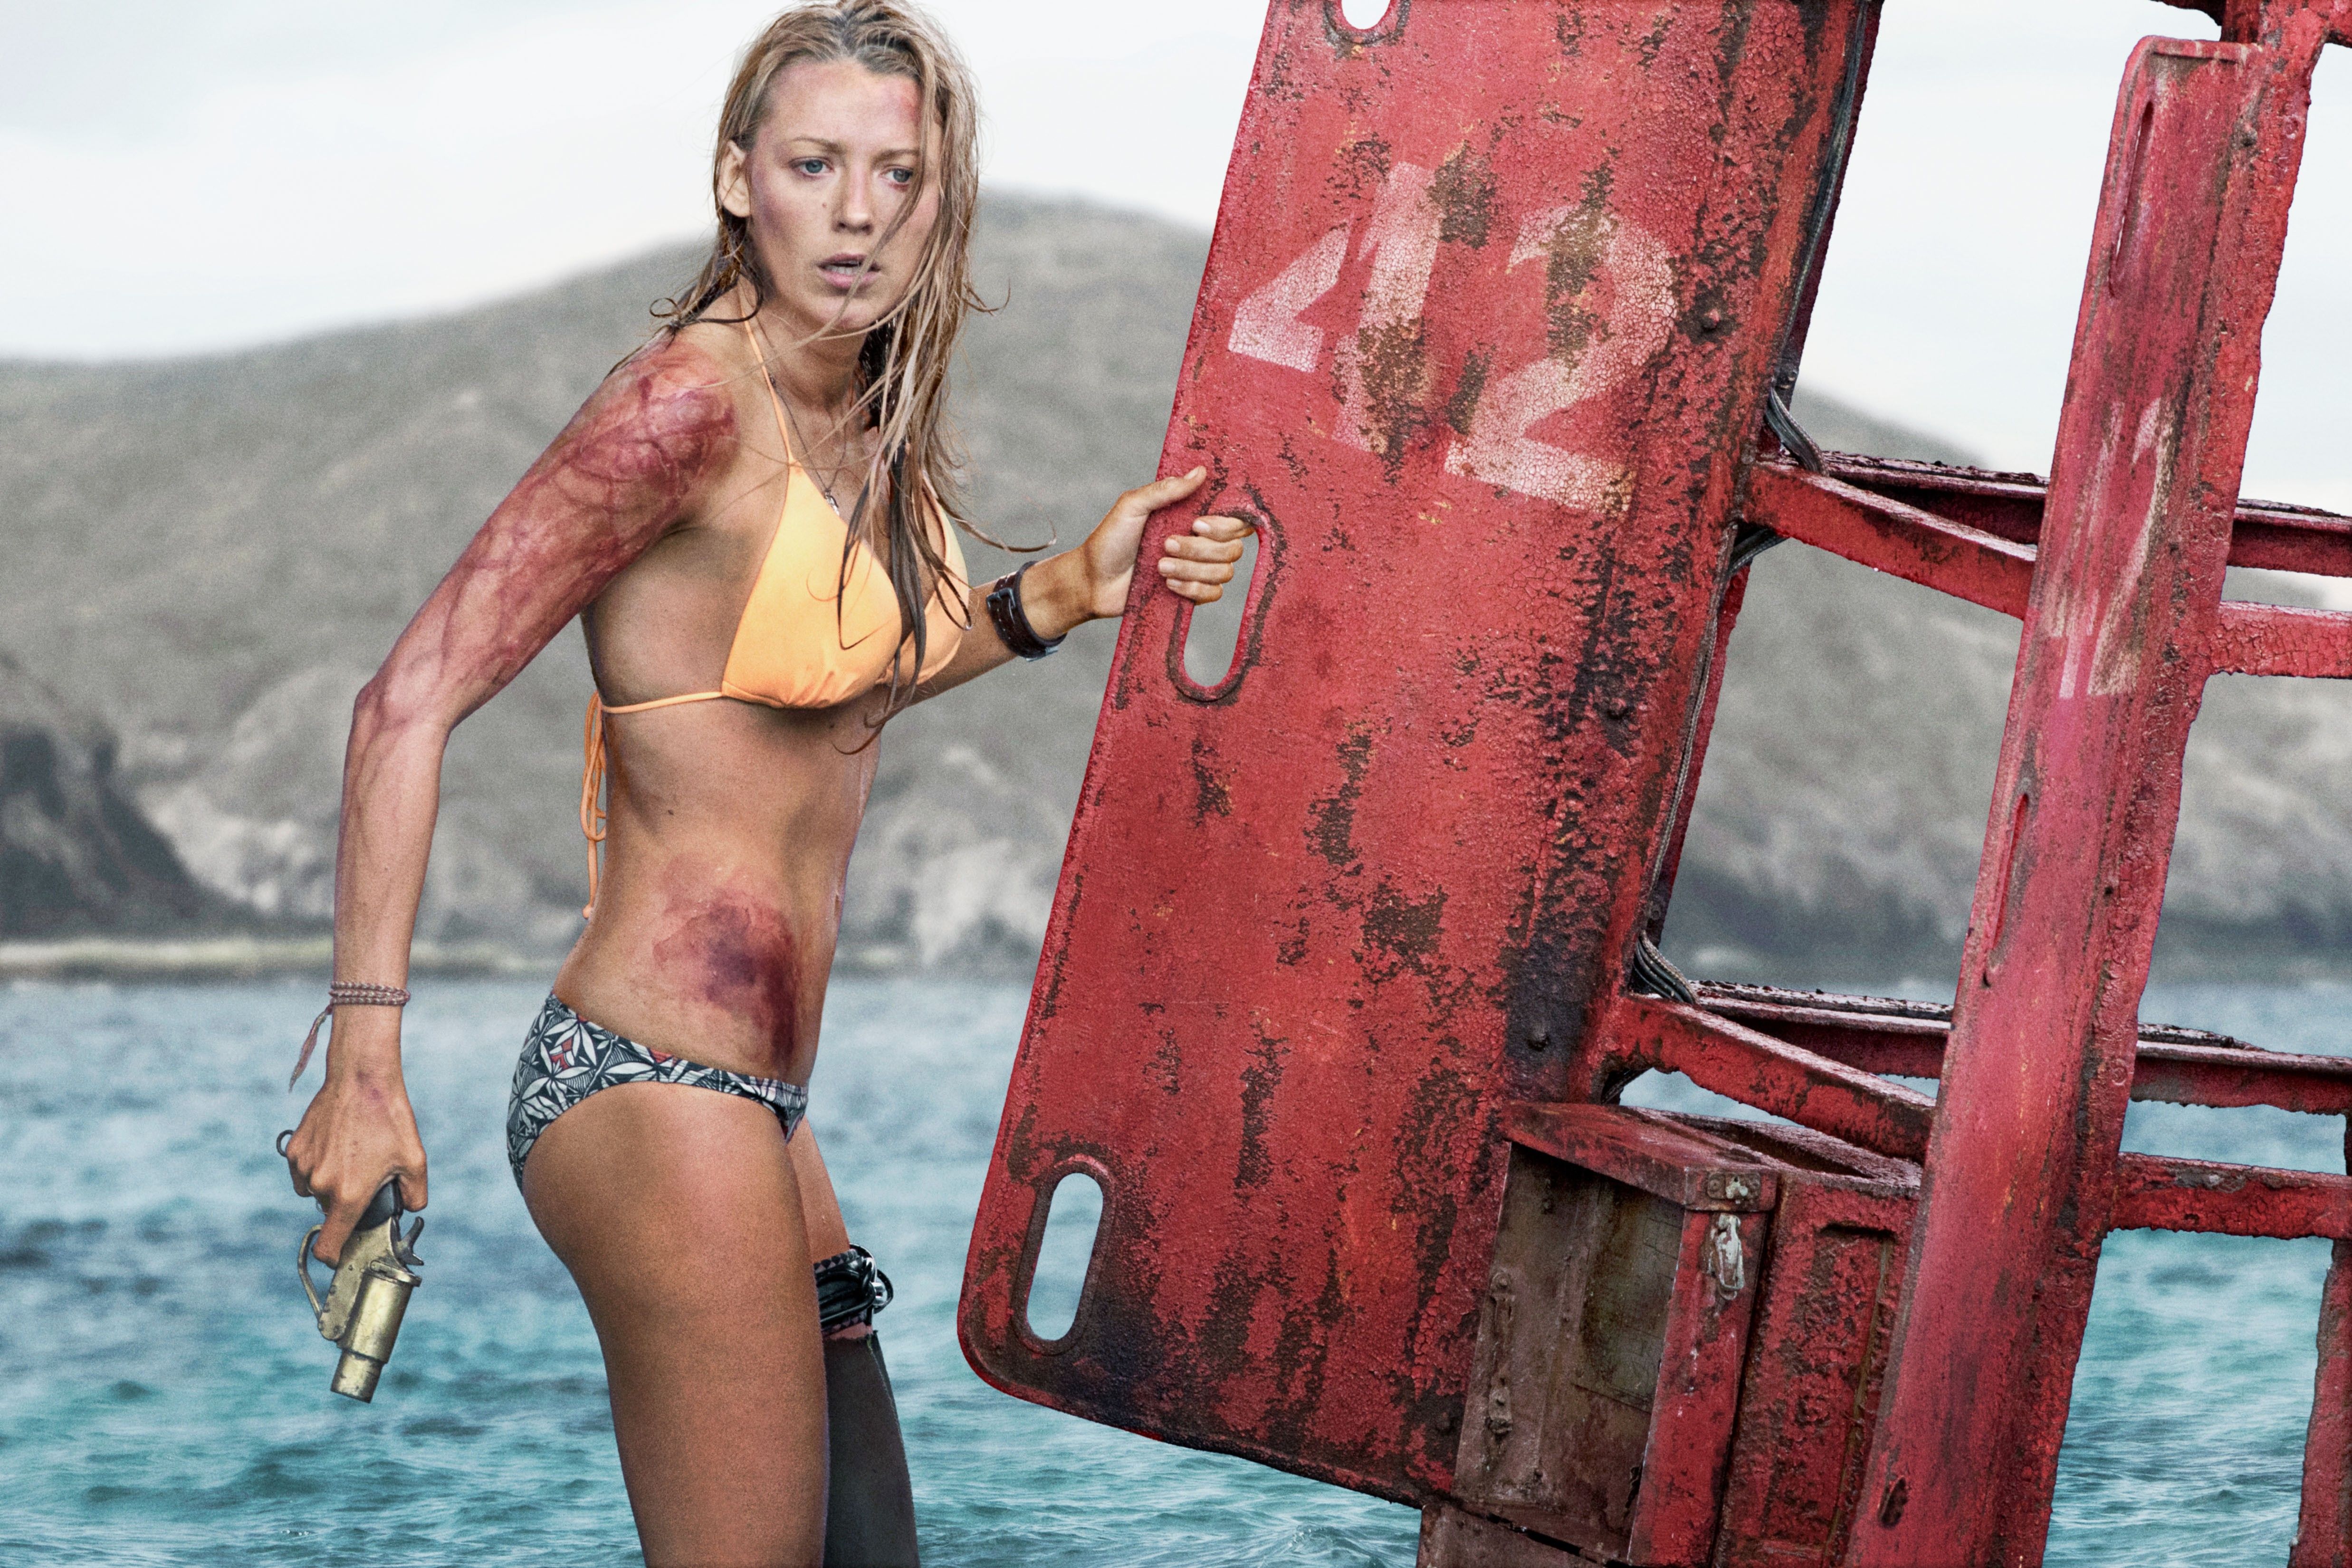 Blake Lively sports a bloodied eye and bruised face on the set of